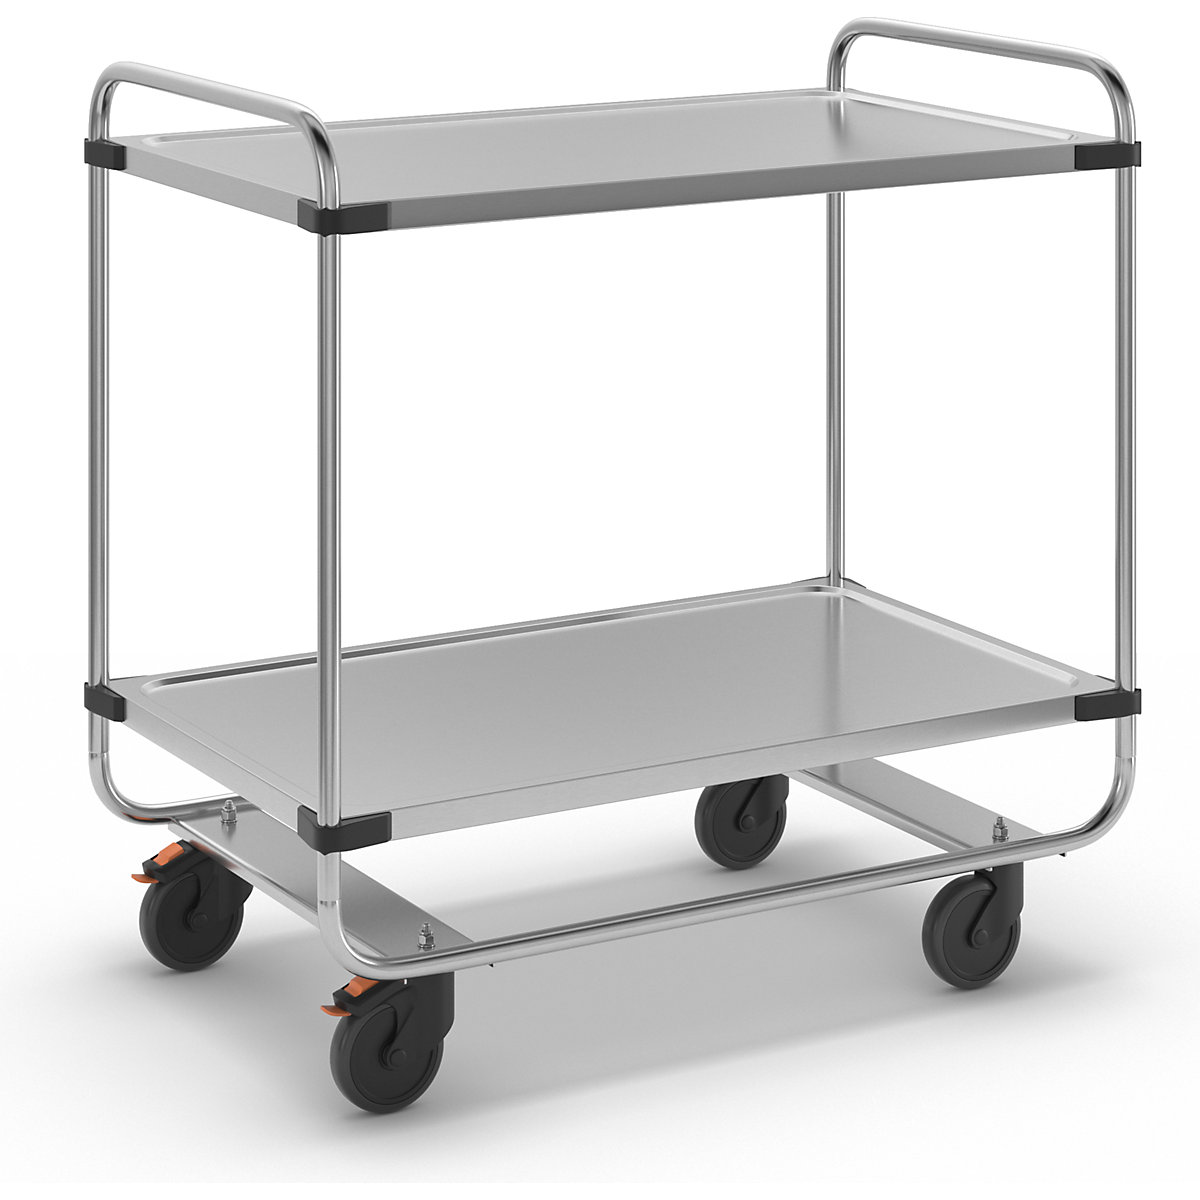 Stainless steel serving trolley, assembled